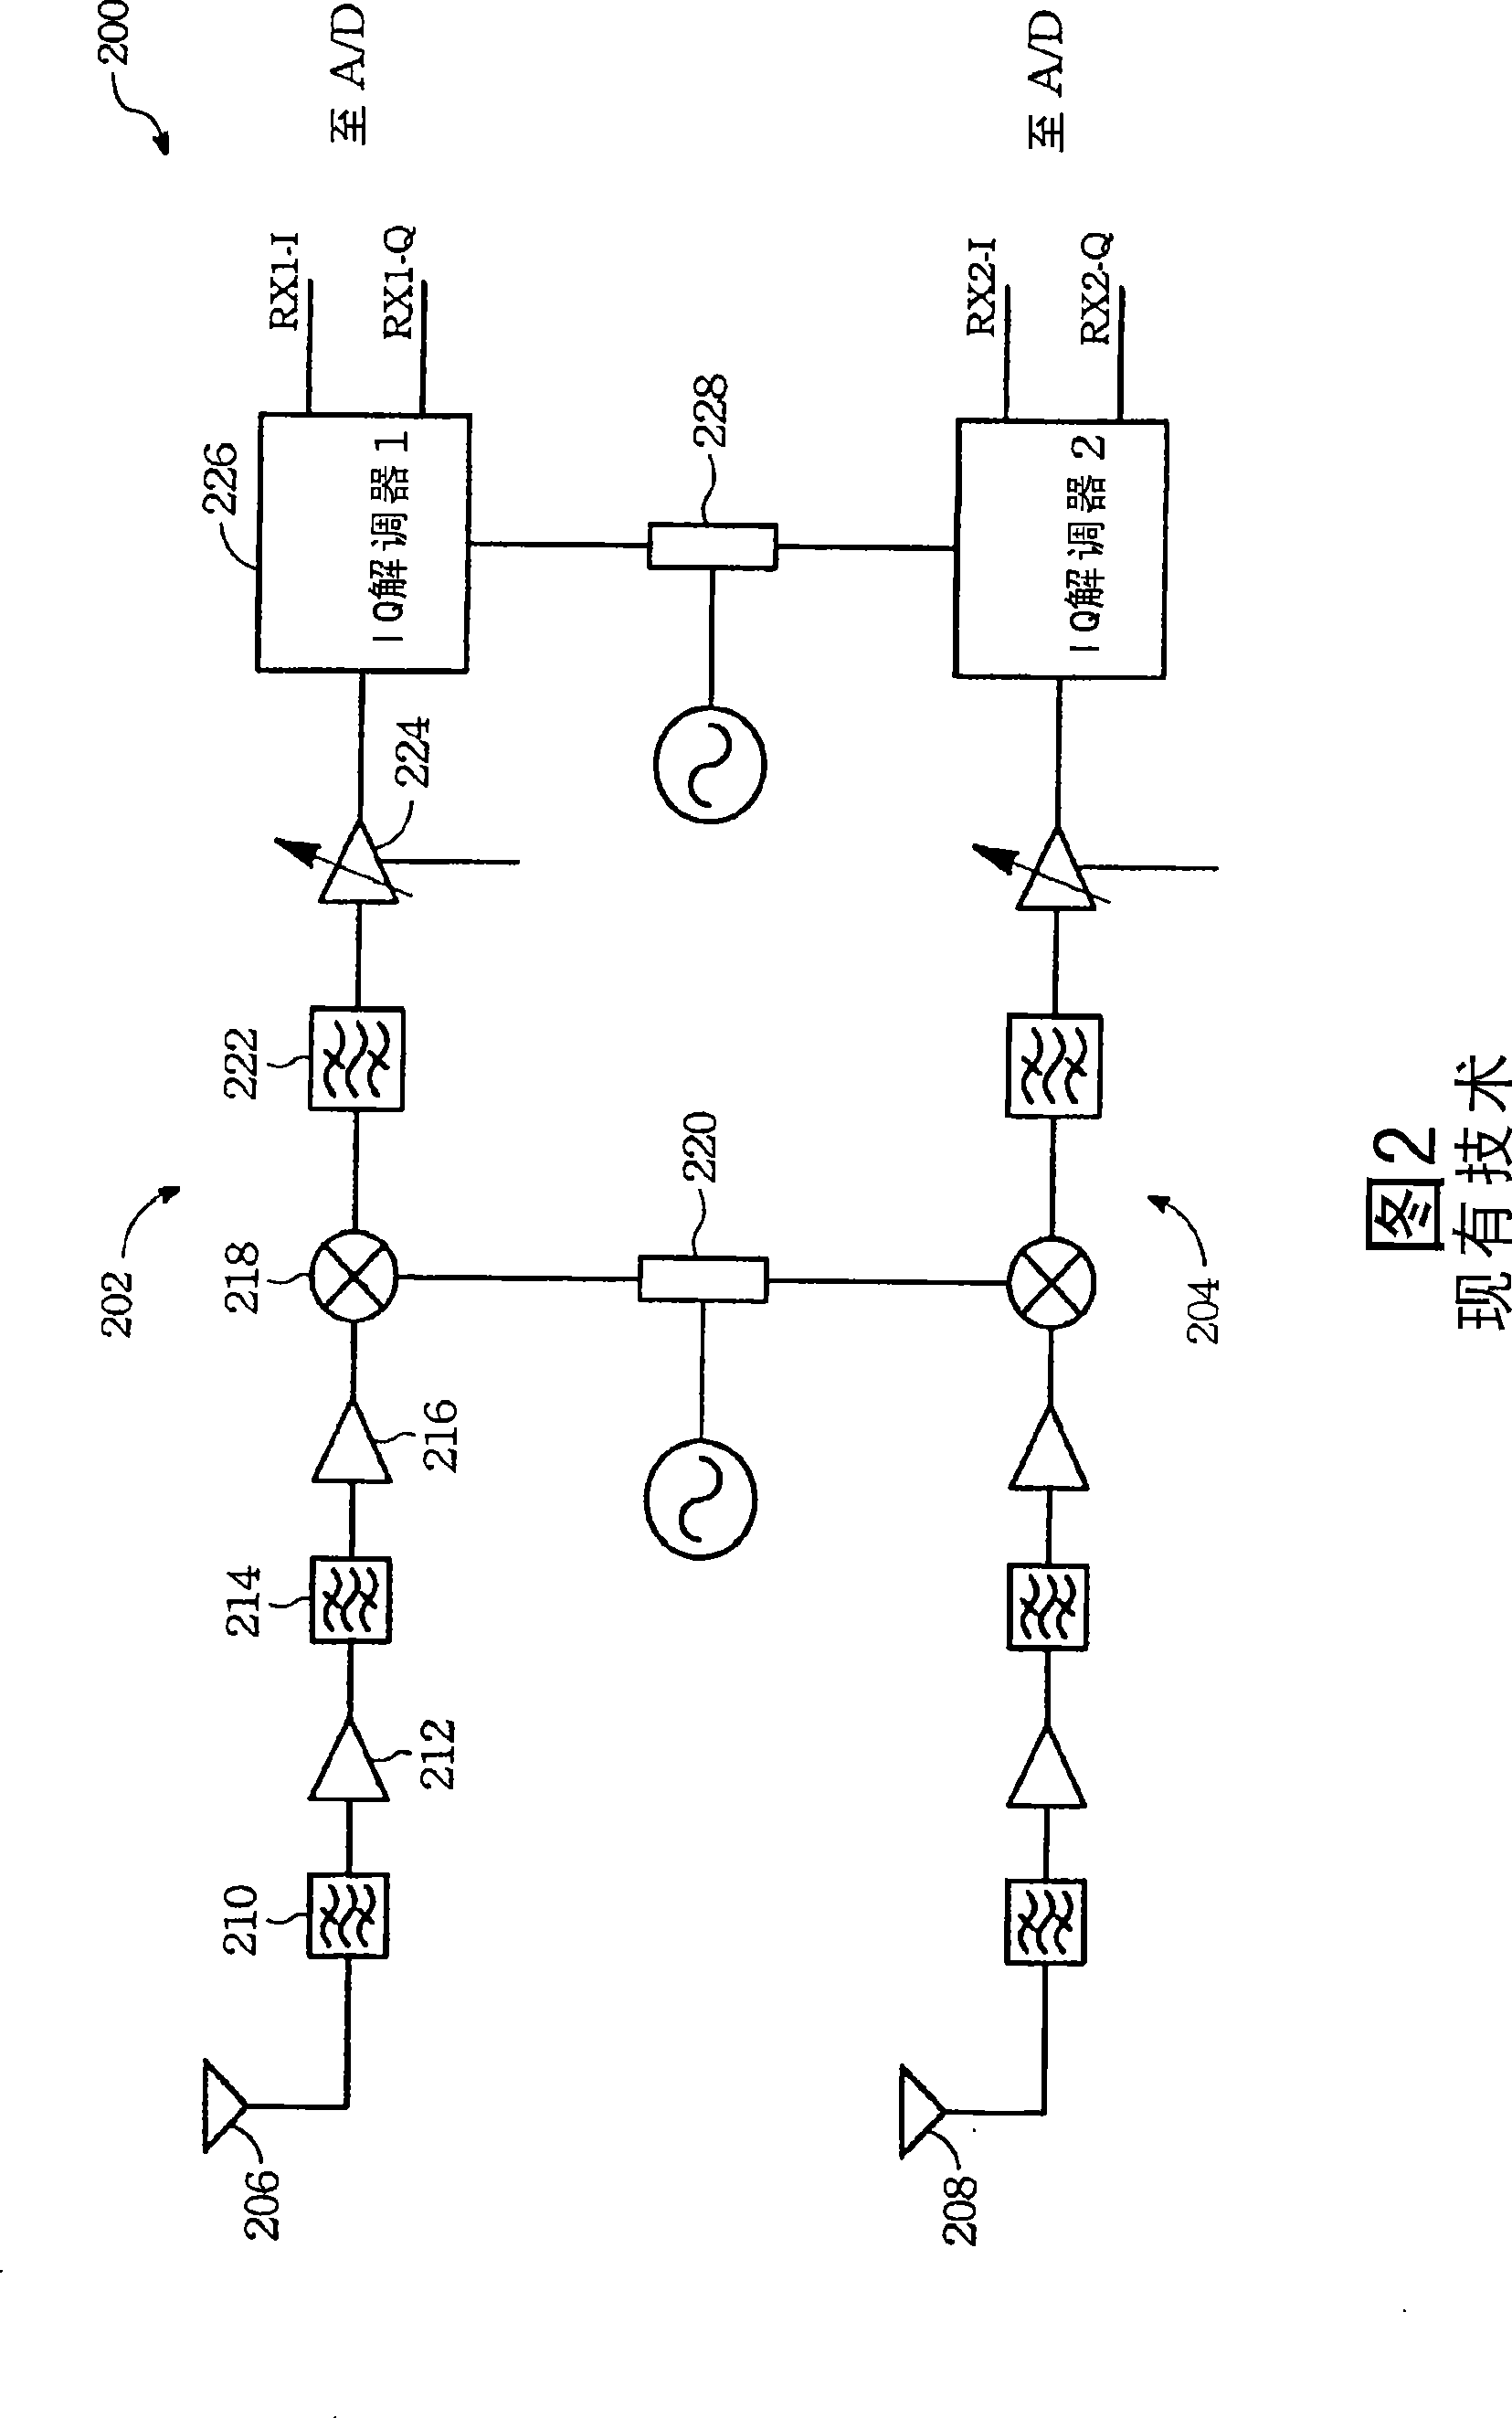 Multiple input multiple output signal receiving apparatus with optimized performance